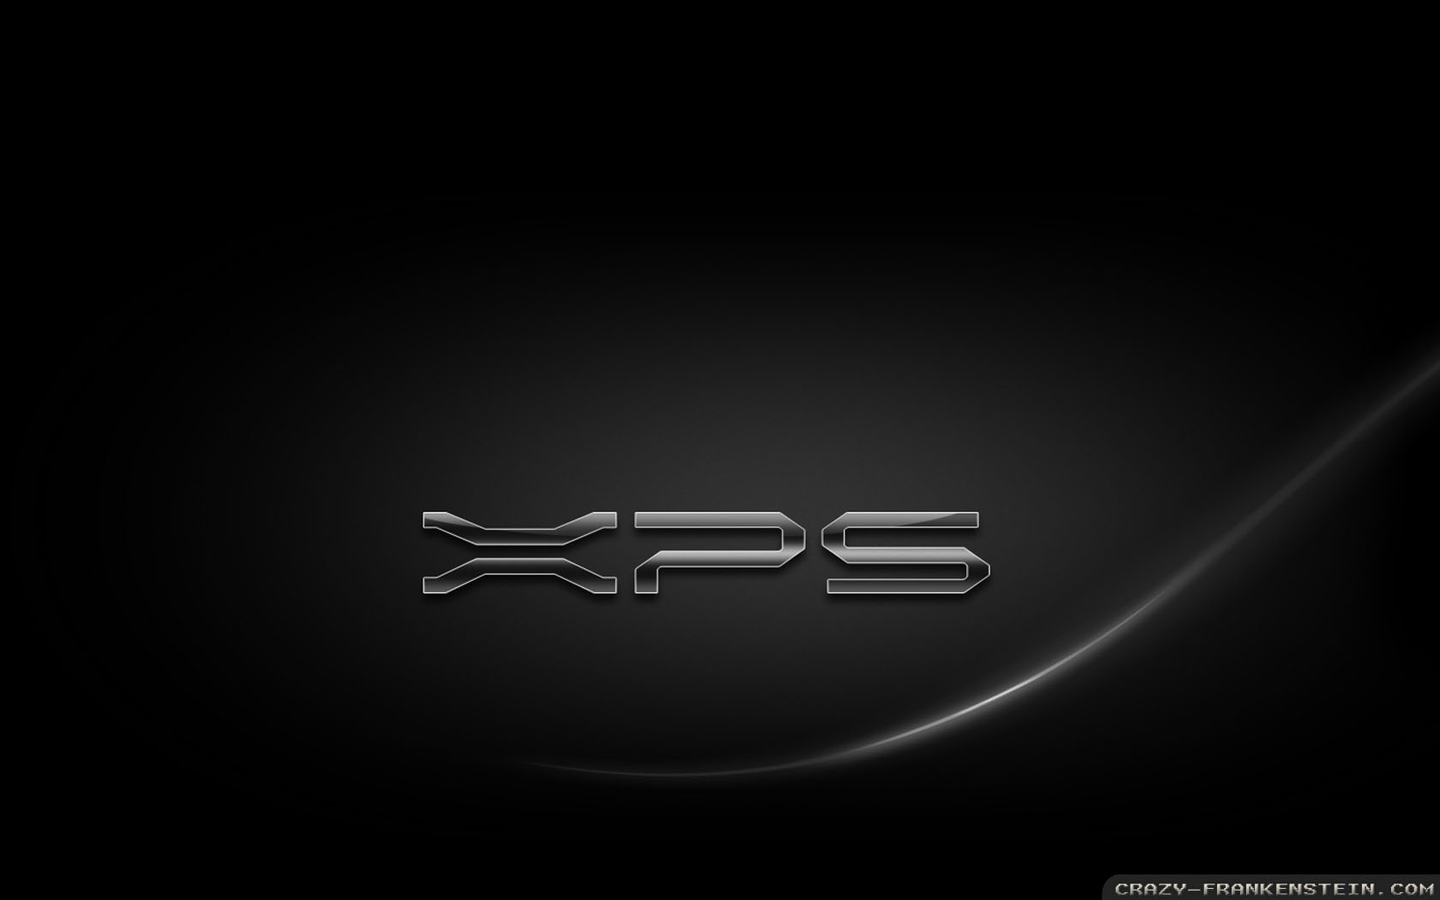 Cool HD Wallpaper For Desktop Right Click To Save Dell